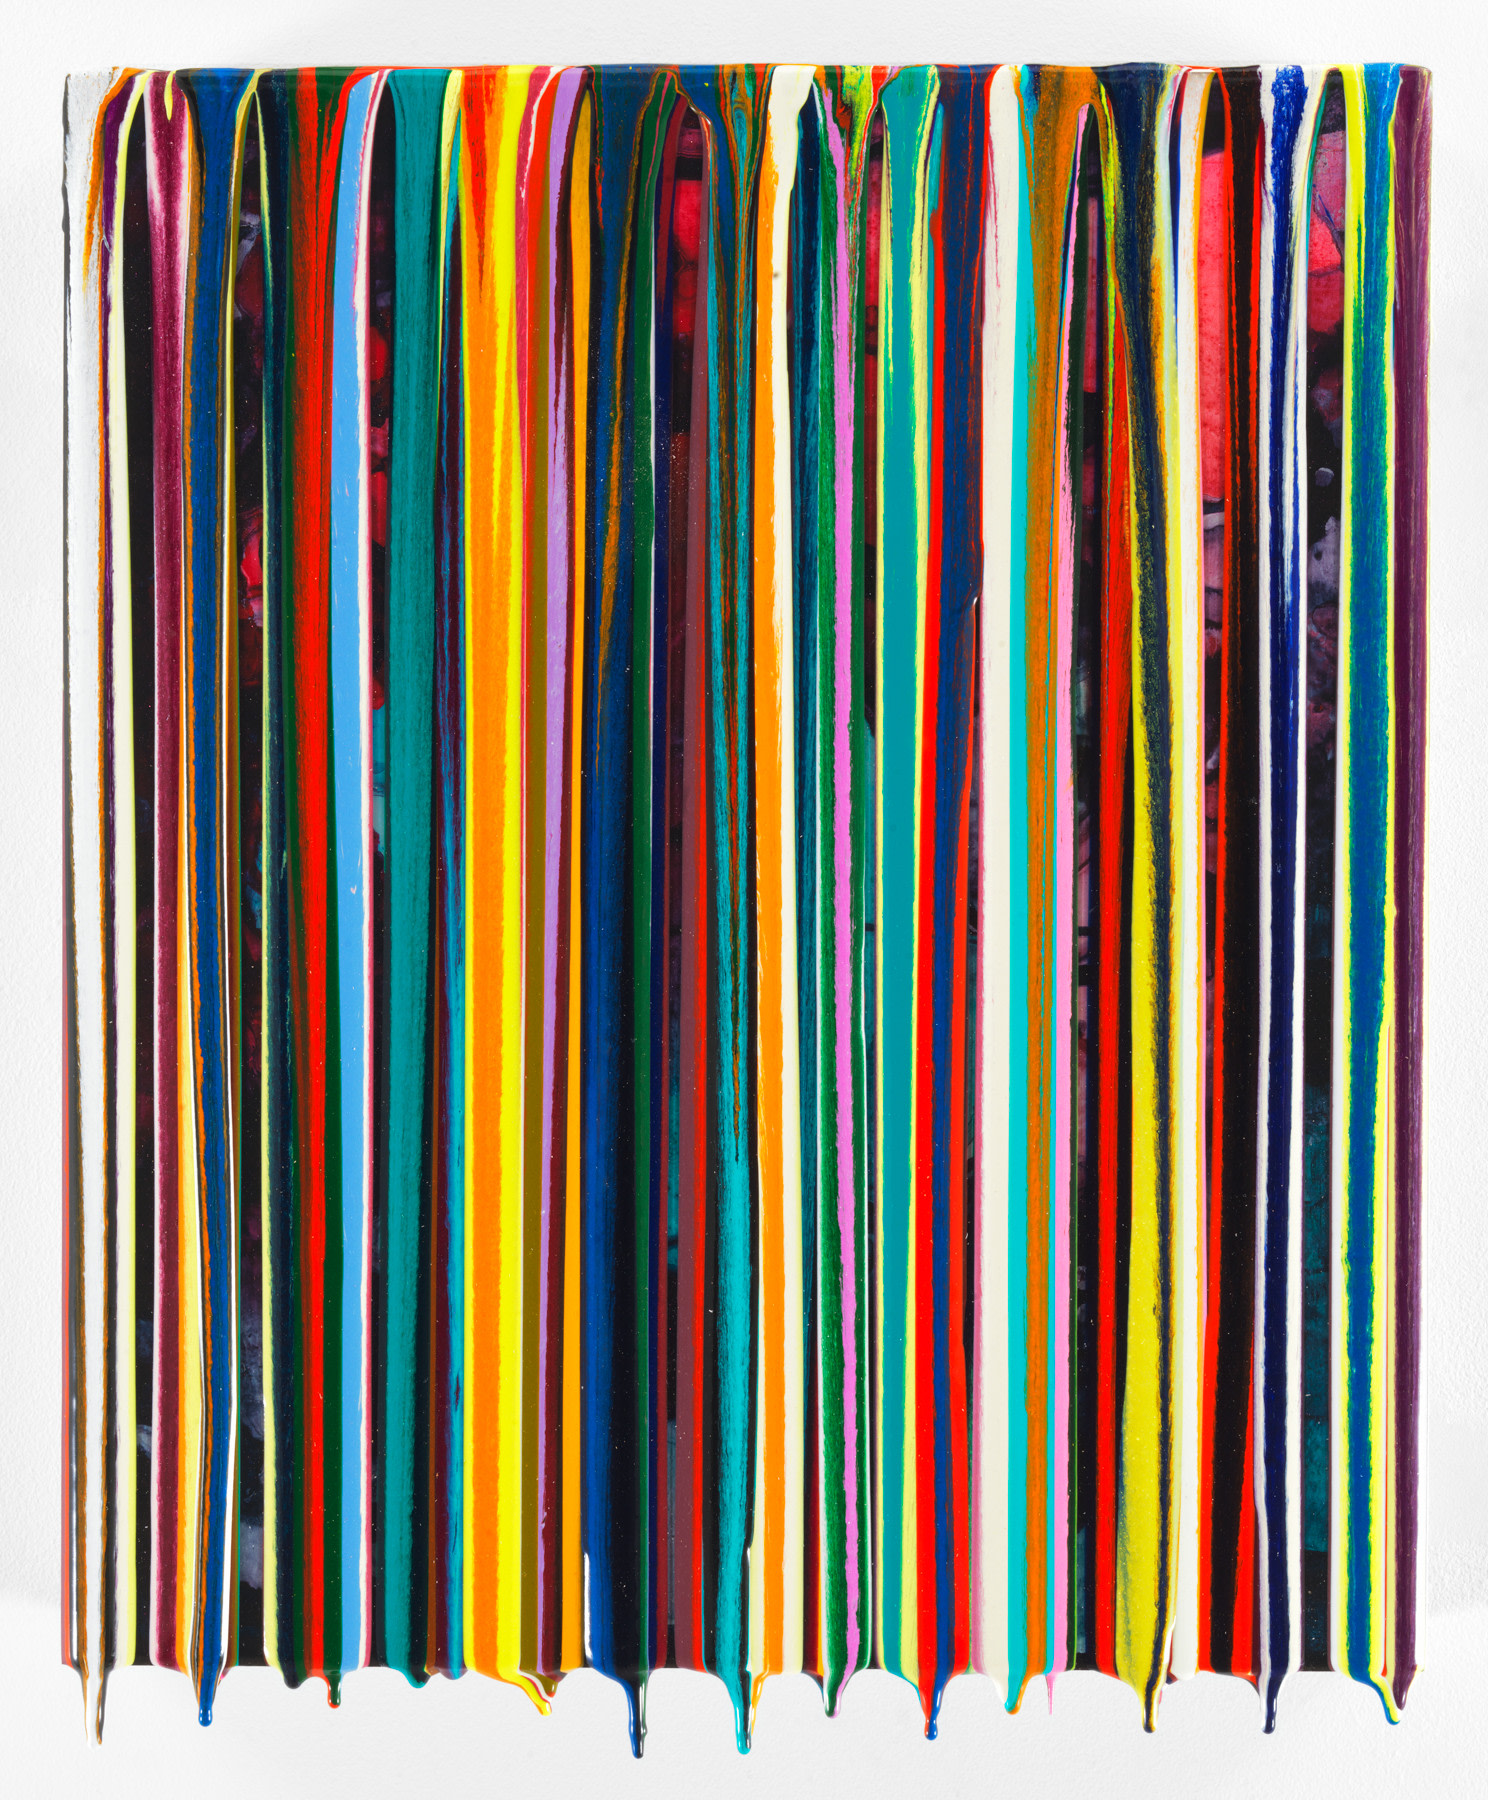 MOREAMORE, 2016, Epoxy resin and pigments on wood, 14 x 16 inches, 35.6 x 40.6 cm, AMY#28450